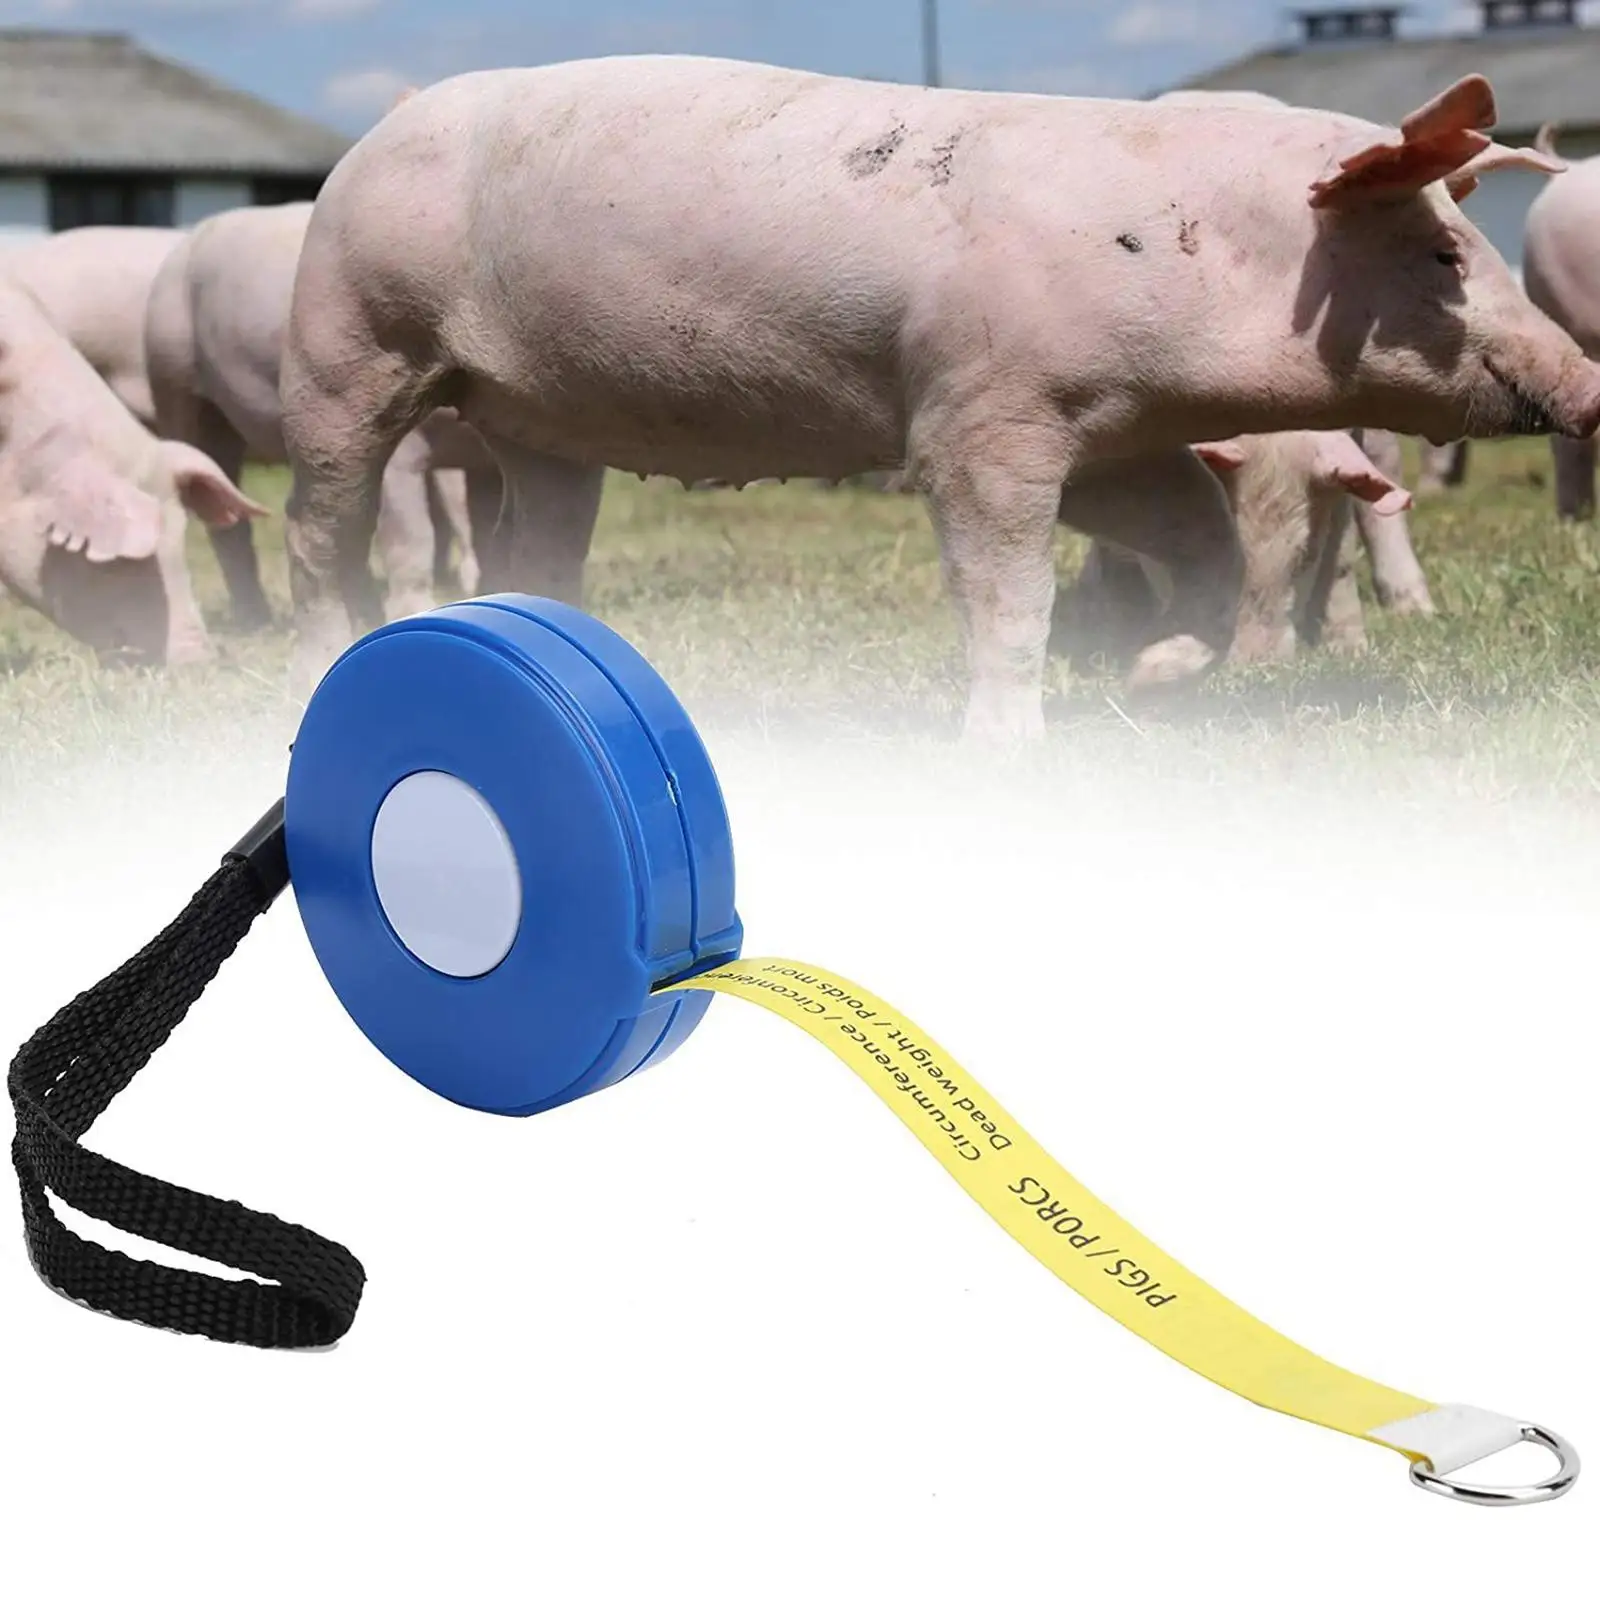 Retractable Pigs Weight Measure Tape Cattle Measuring Tool Weigh Self Retracting Equipment for Farming Body Measurements Animal